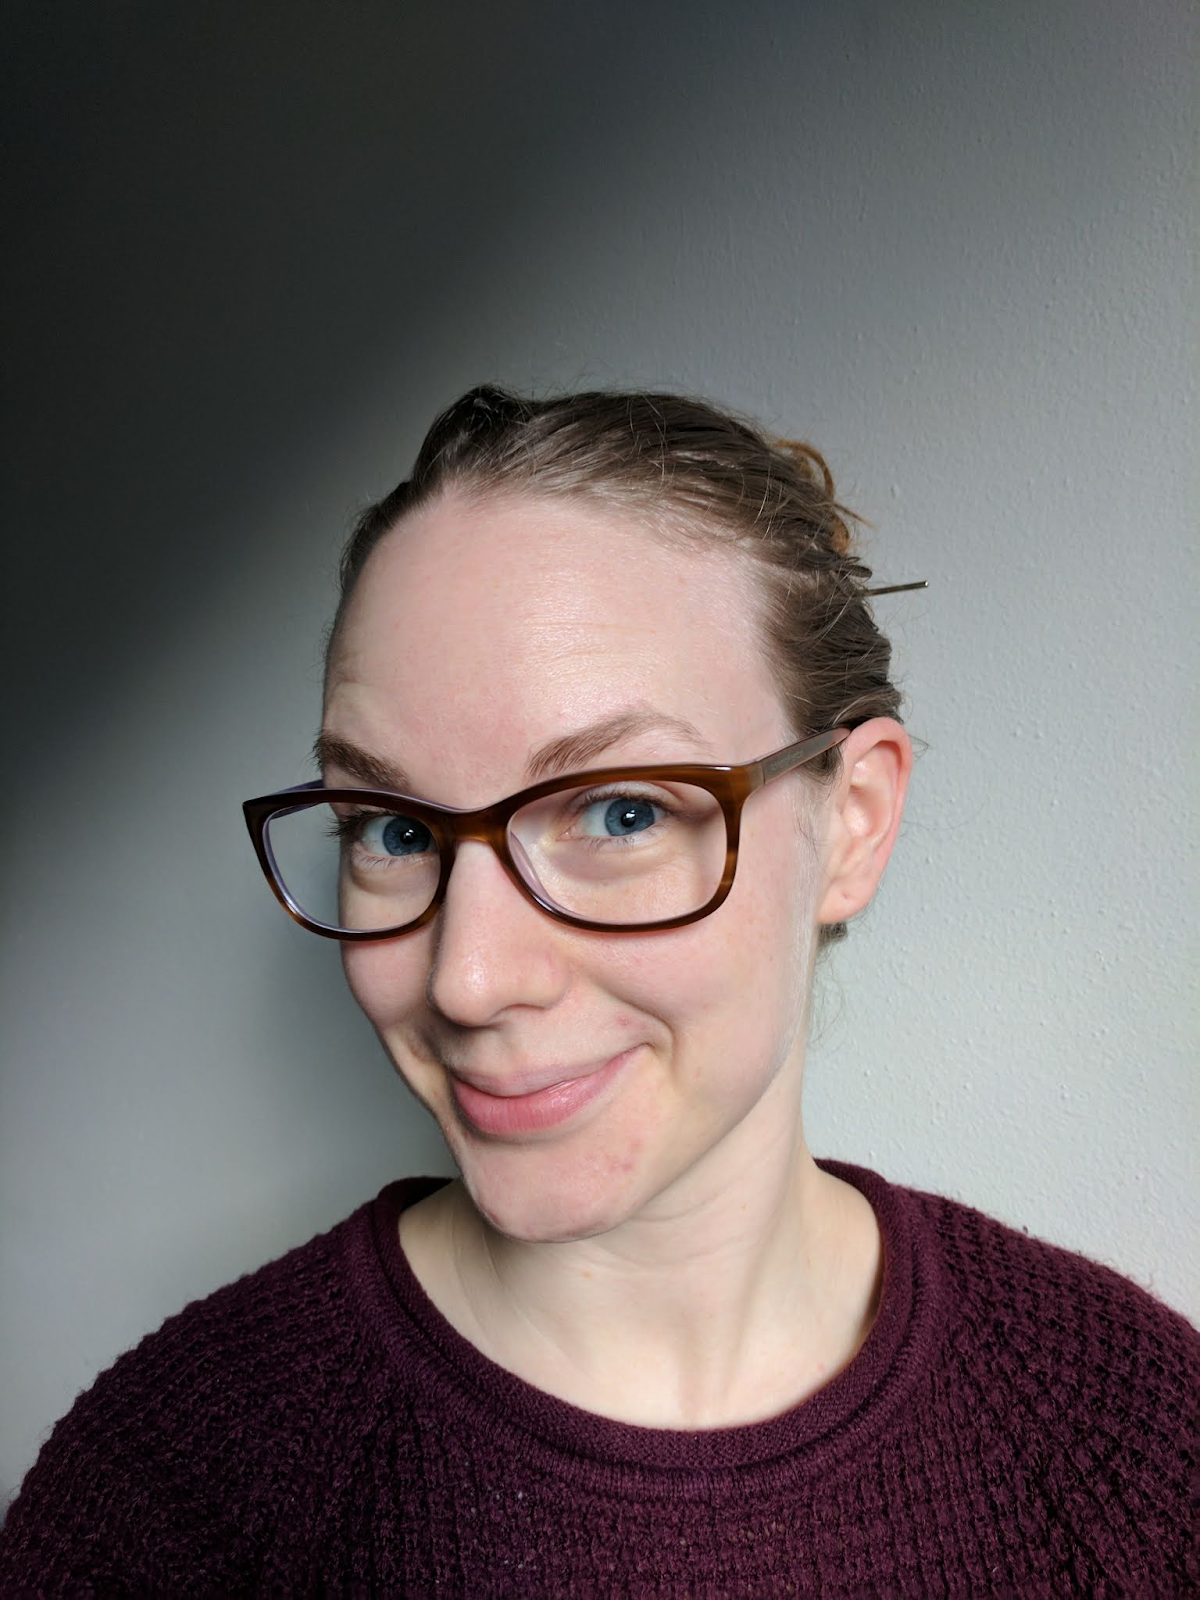 Interview with Data Scientist at kaggle: Dr. Rachael Tatman